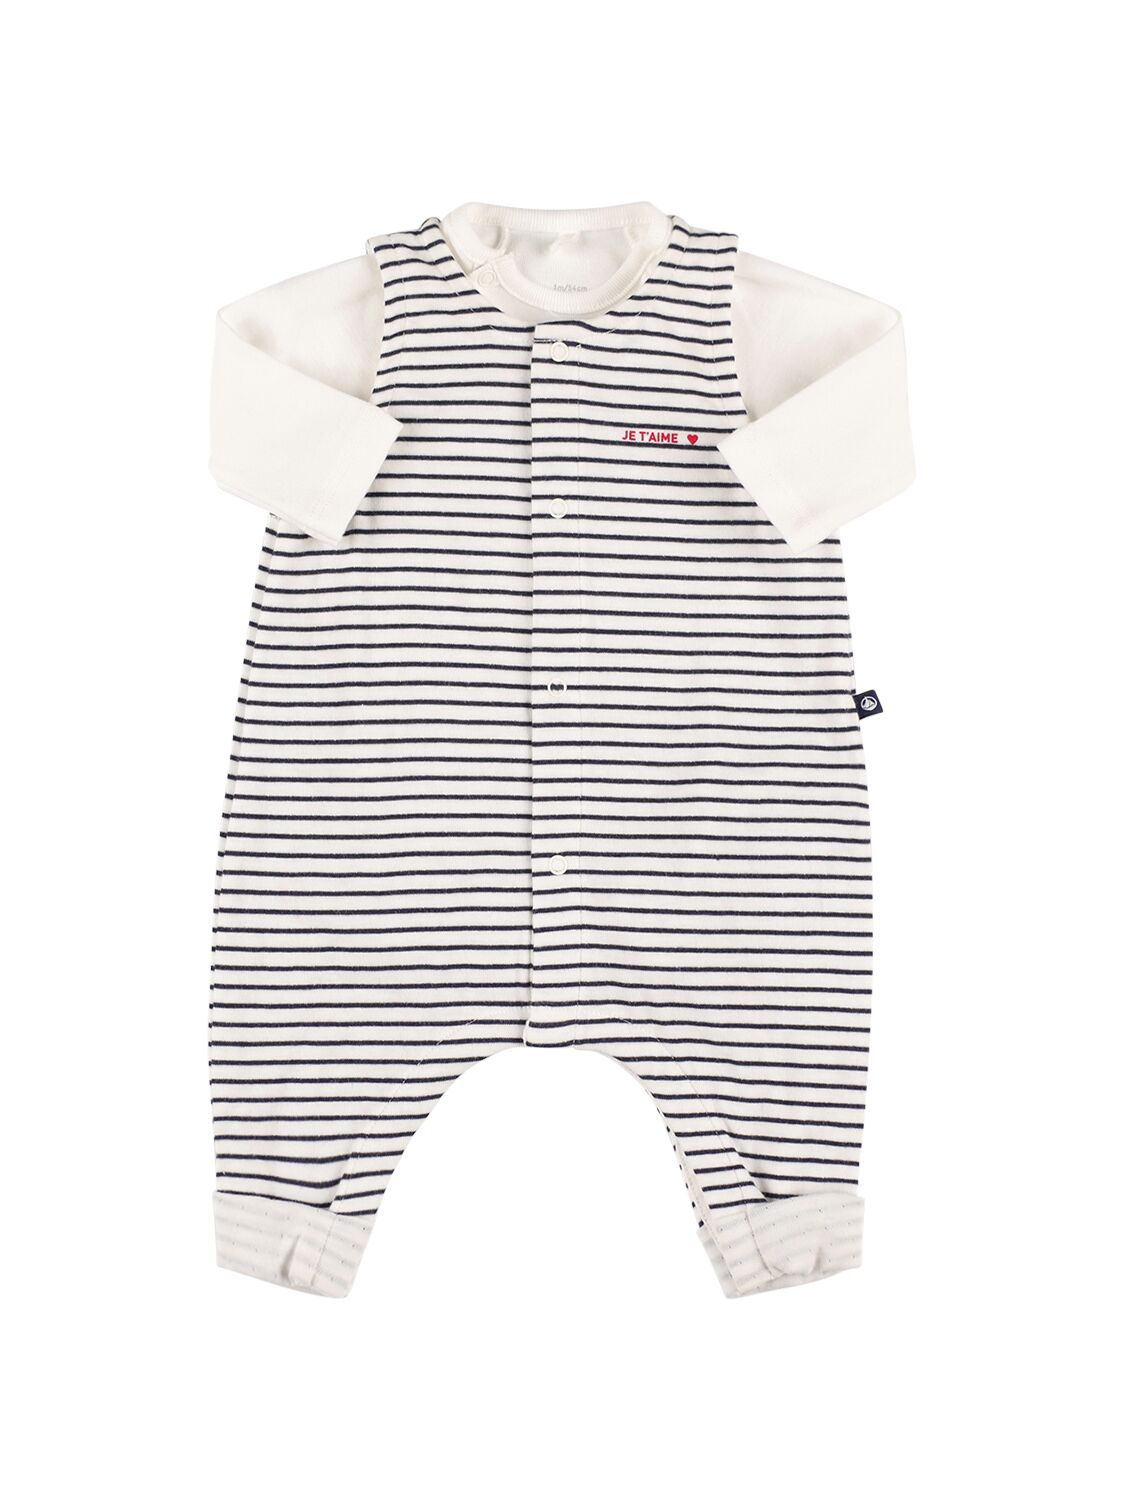 Petit Bateau Babies' Striped Cotton Overalls & T-shirt In White,navy